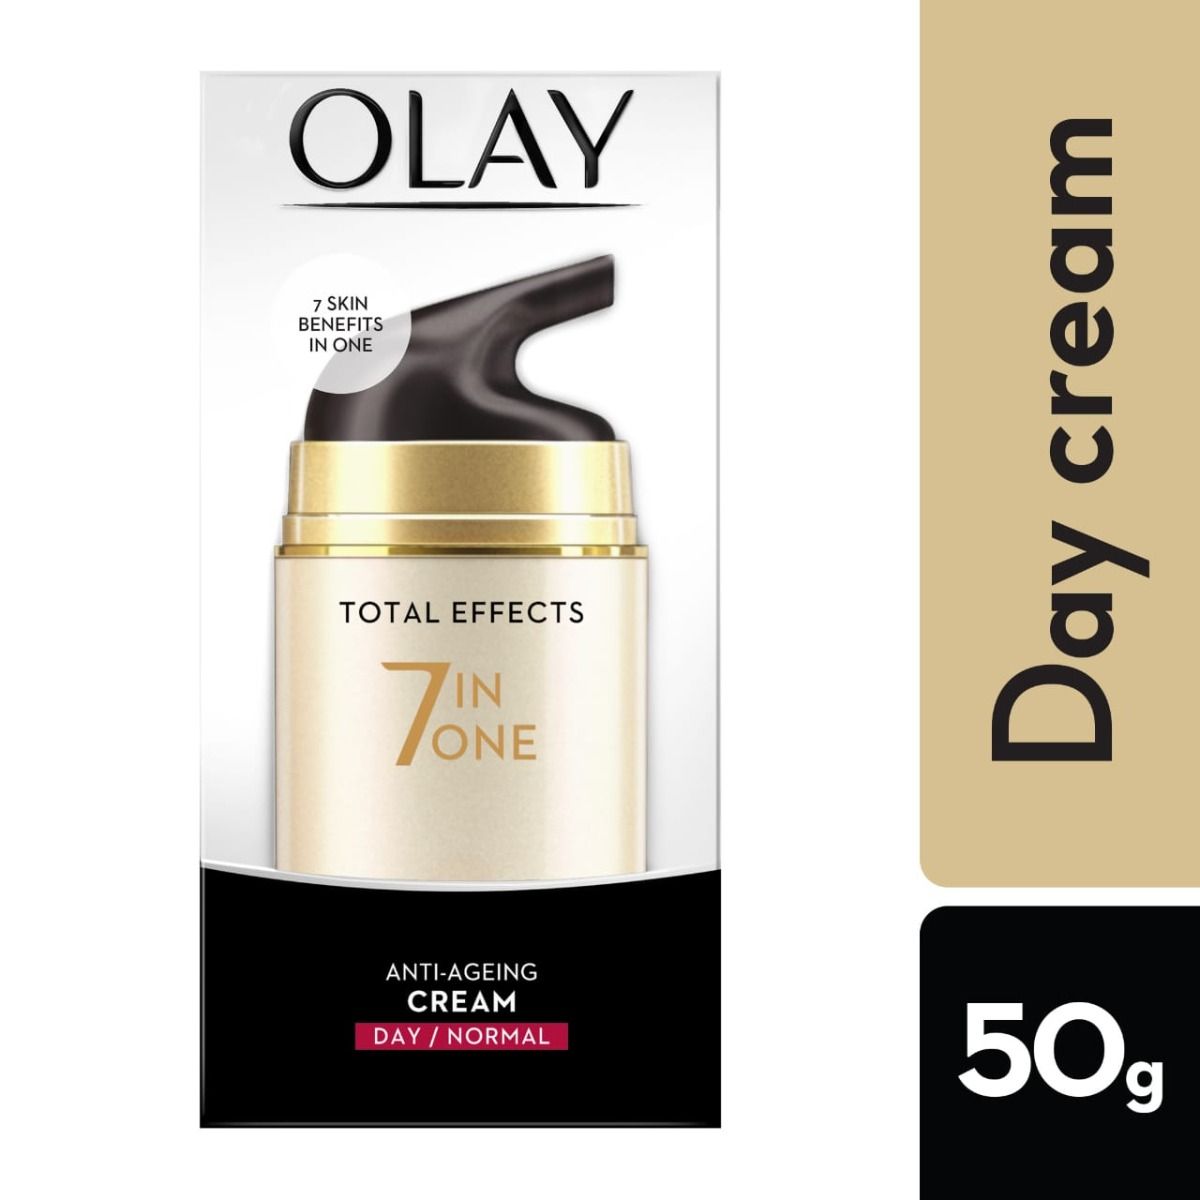 Olay Total Effects 7 IN 1 Anti-Ageing Day Cream SPF 15, 50 gm, Pack of 1 